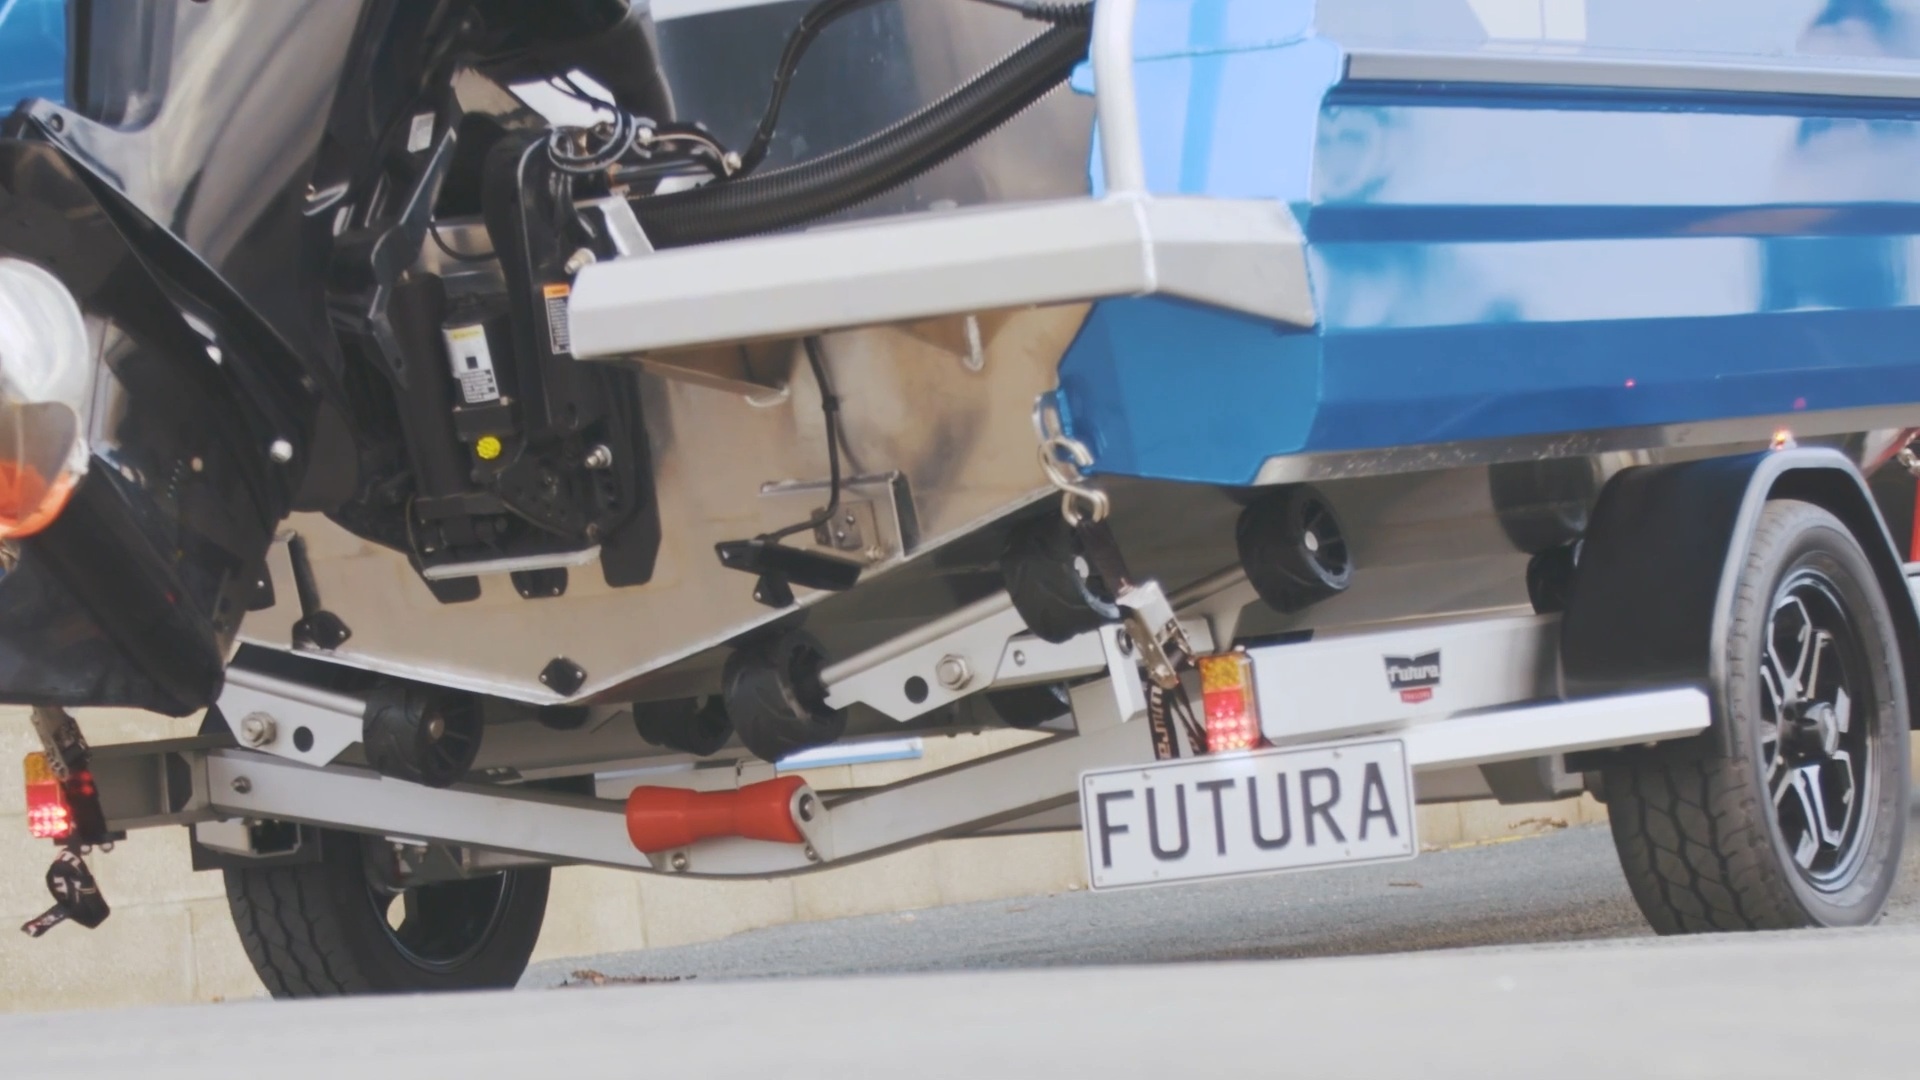 Futura S475 QDK Boat Trailer rear side with Stabicraft loaded on it